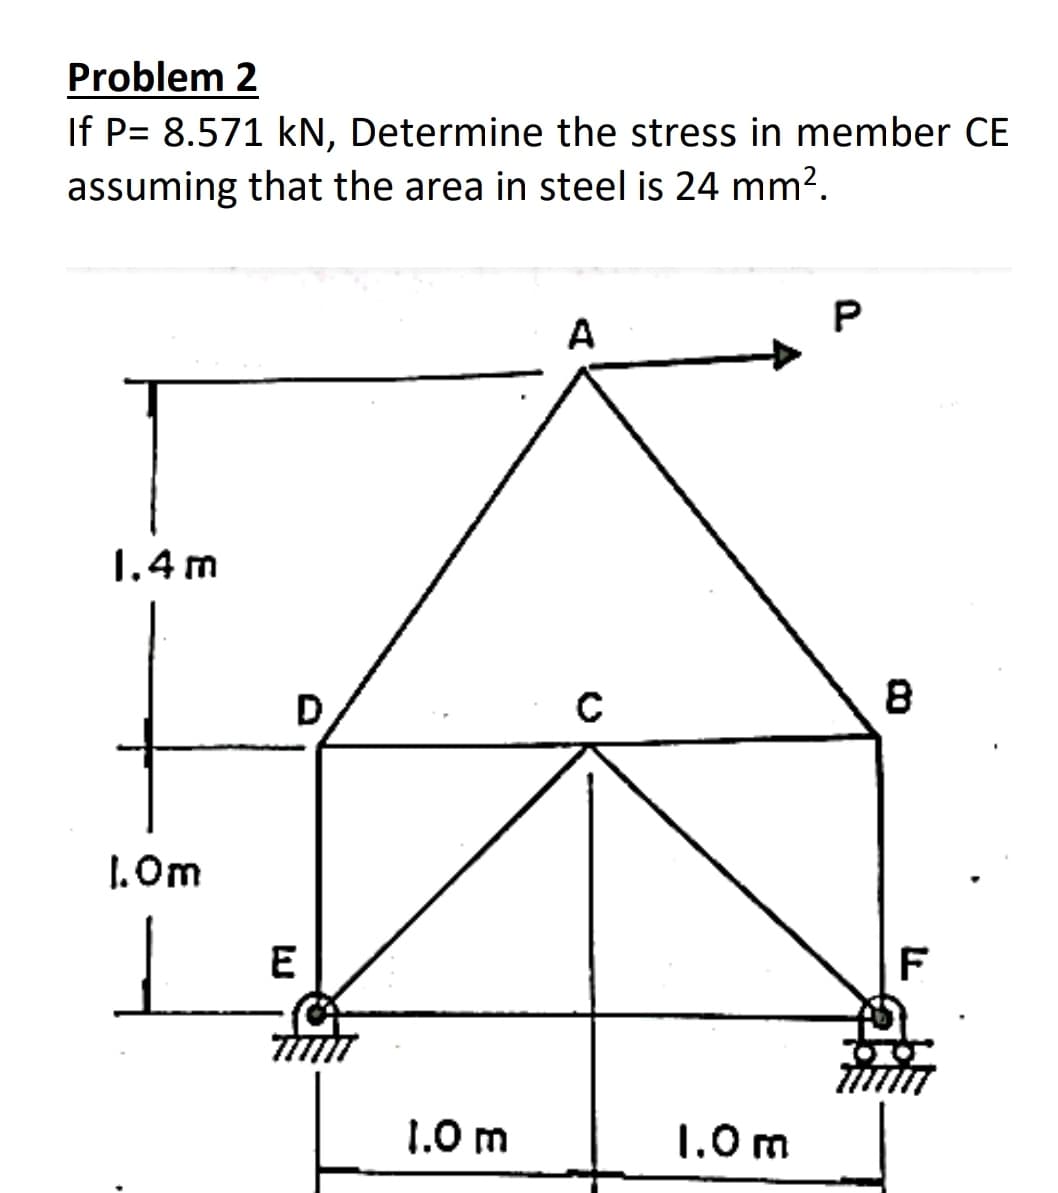 Problem 2
If P= 8.571 kN, Determine the stress in member CE
assuming that the area in steel is 24 mm².
A
1.4 m
D
1. Om
E
F
1.0 m
1.0 m
